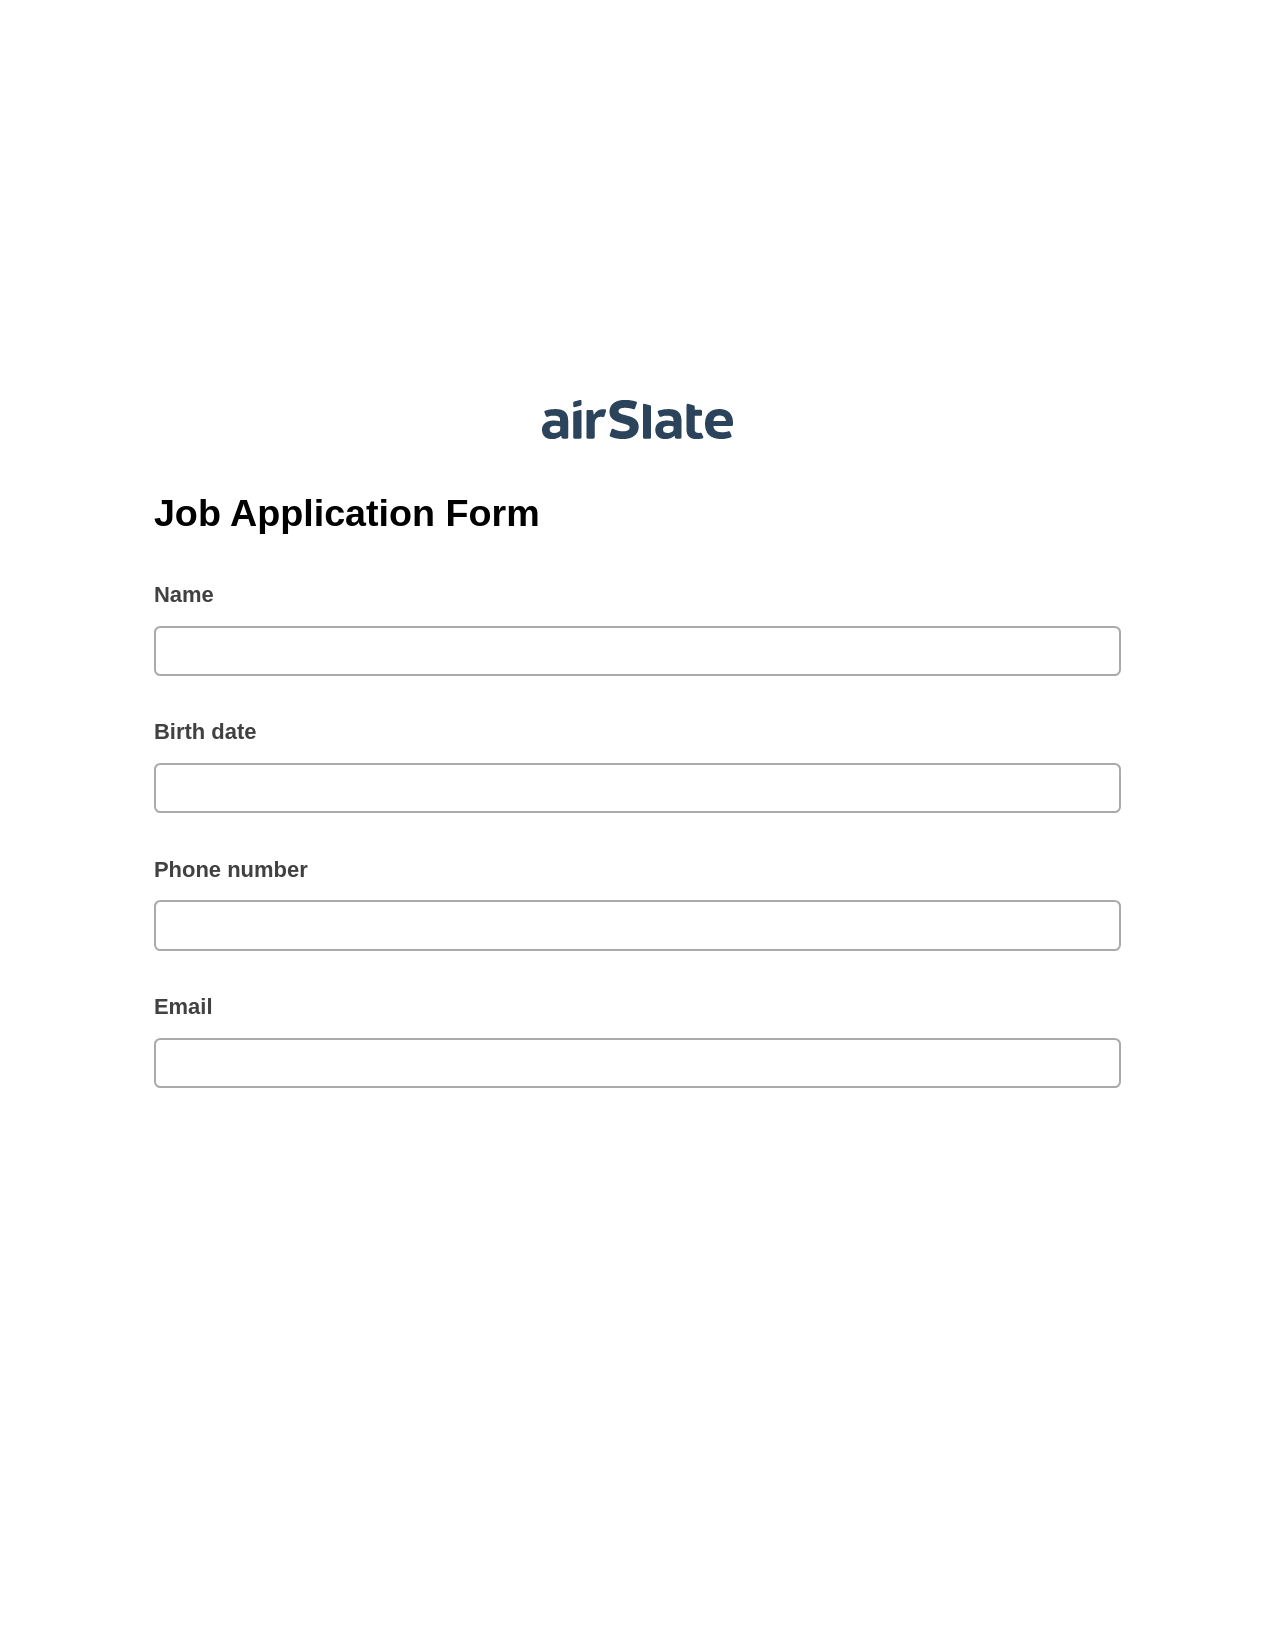 Job Application Form Pre-fill from Litmos bot, Roles Reminder Bot, Export to Formstack Documents Bot